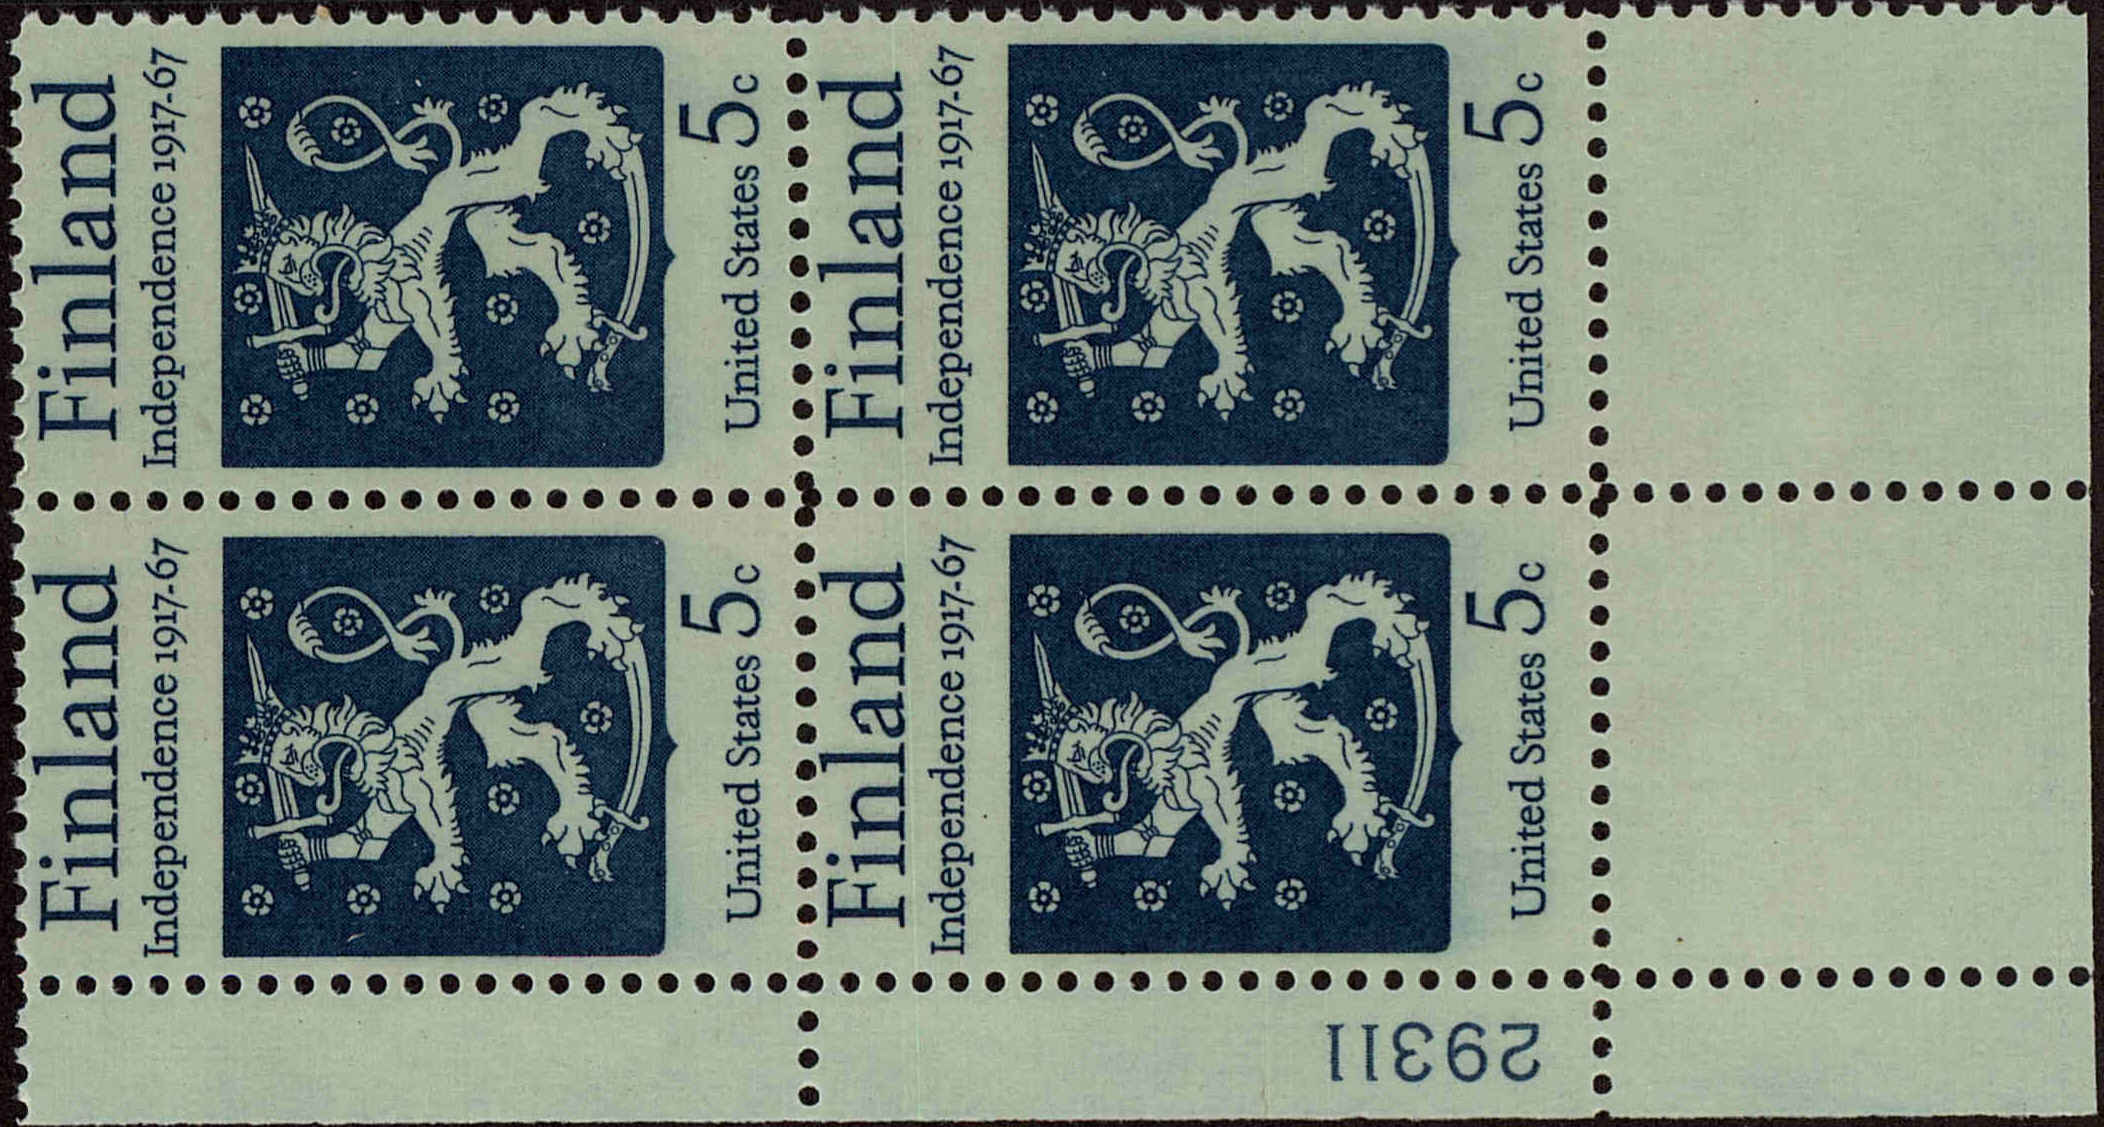 Front view of United States 1334 collectors stamp